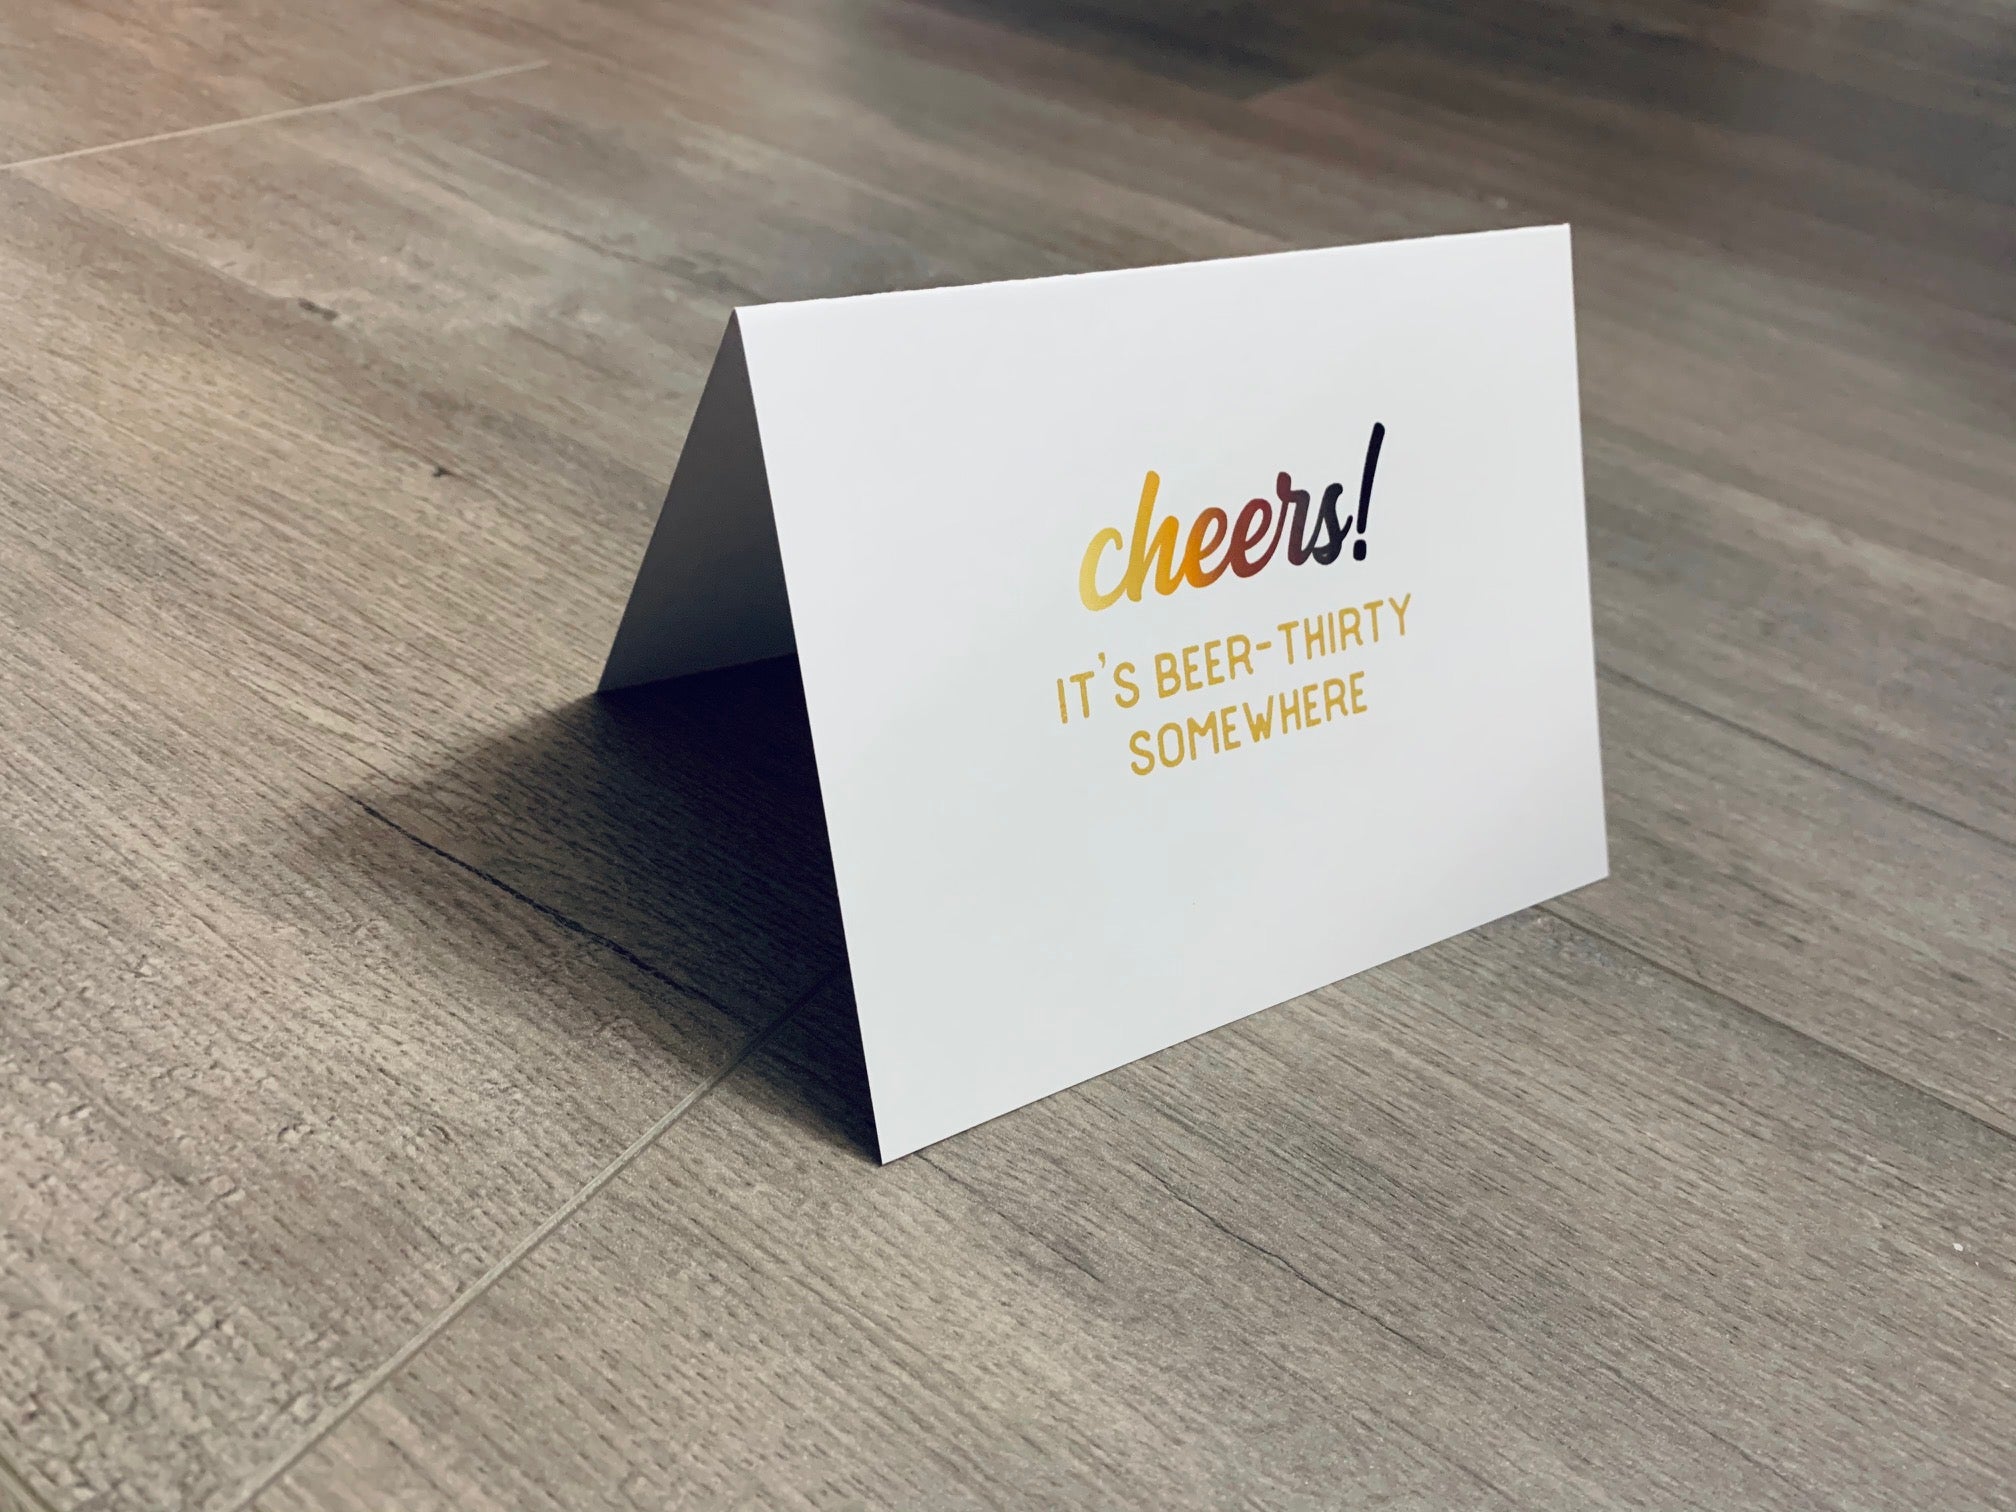 A white card is propped on a gray wood floor. The card reads, "Cheers! It's beer-thirty somewhere." Beer Lovers Collection by Stationare.